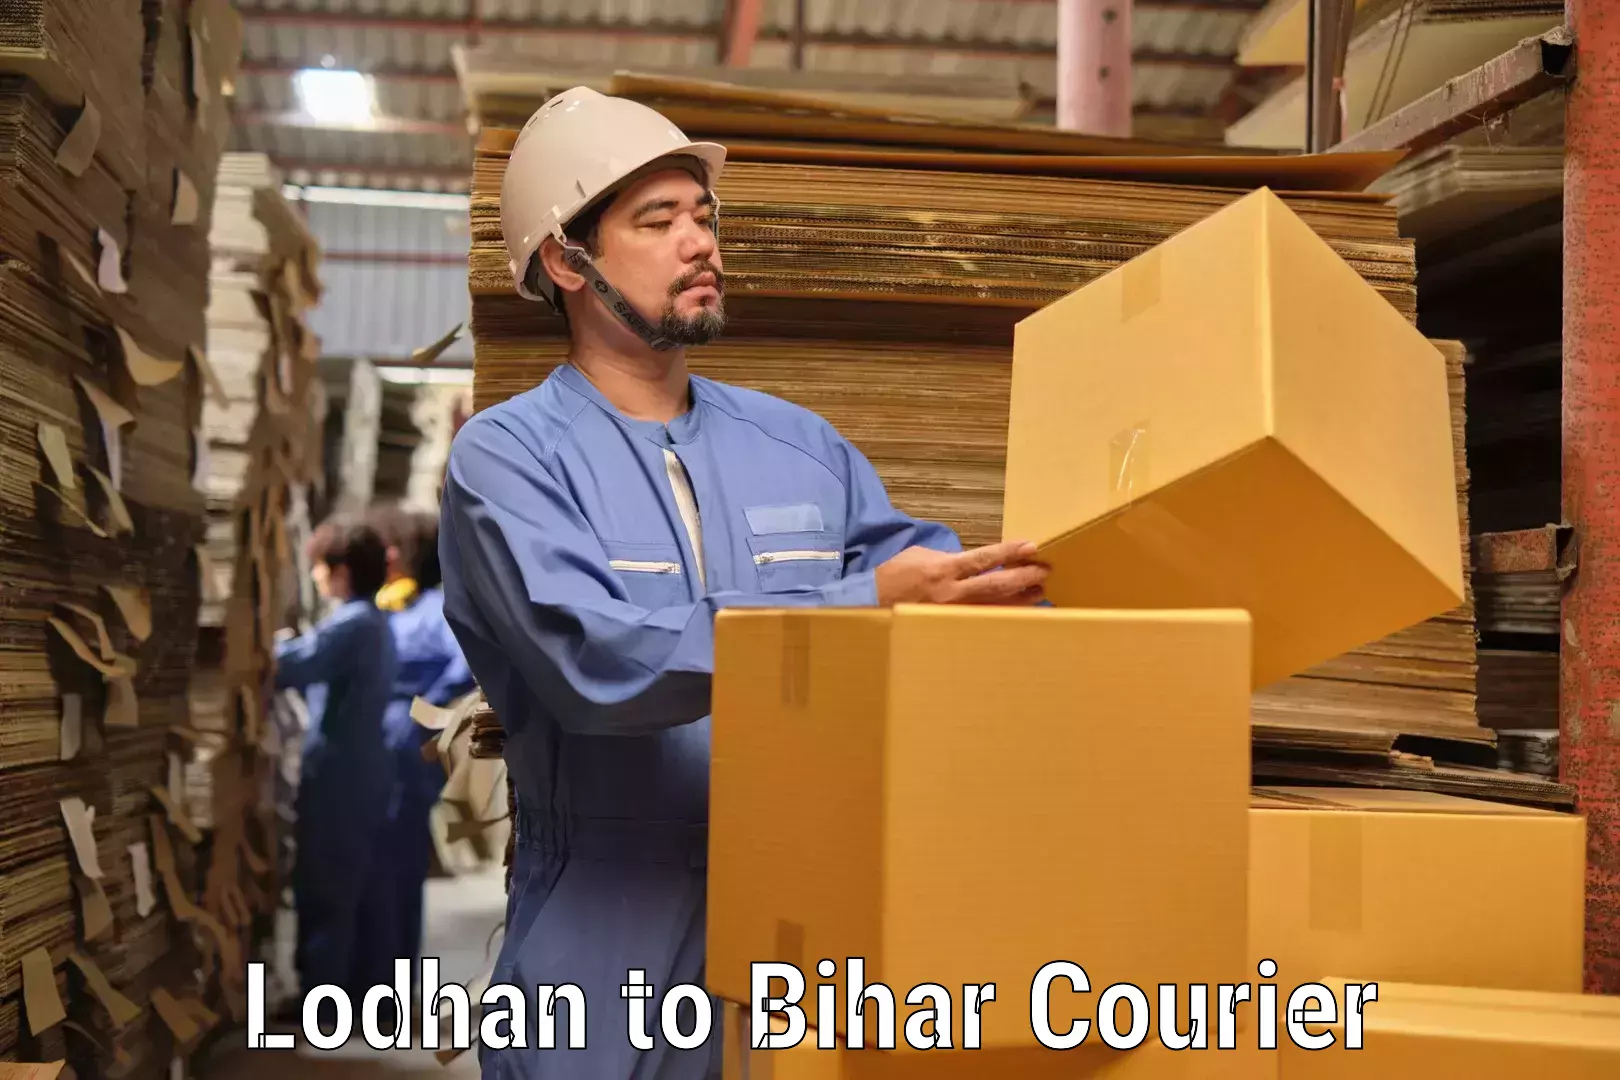 Courier tracking online Lodhan to Bihar